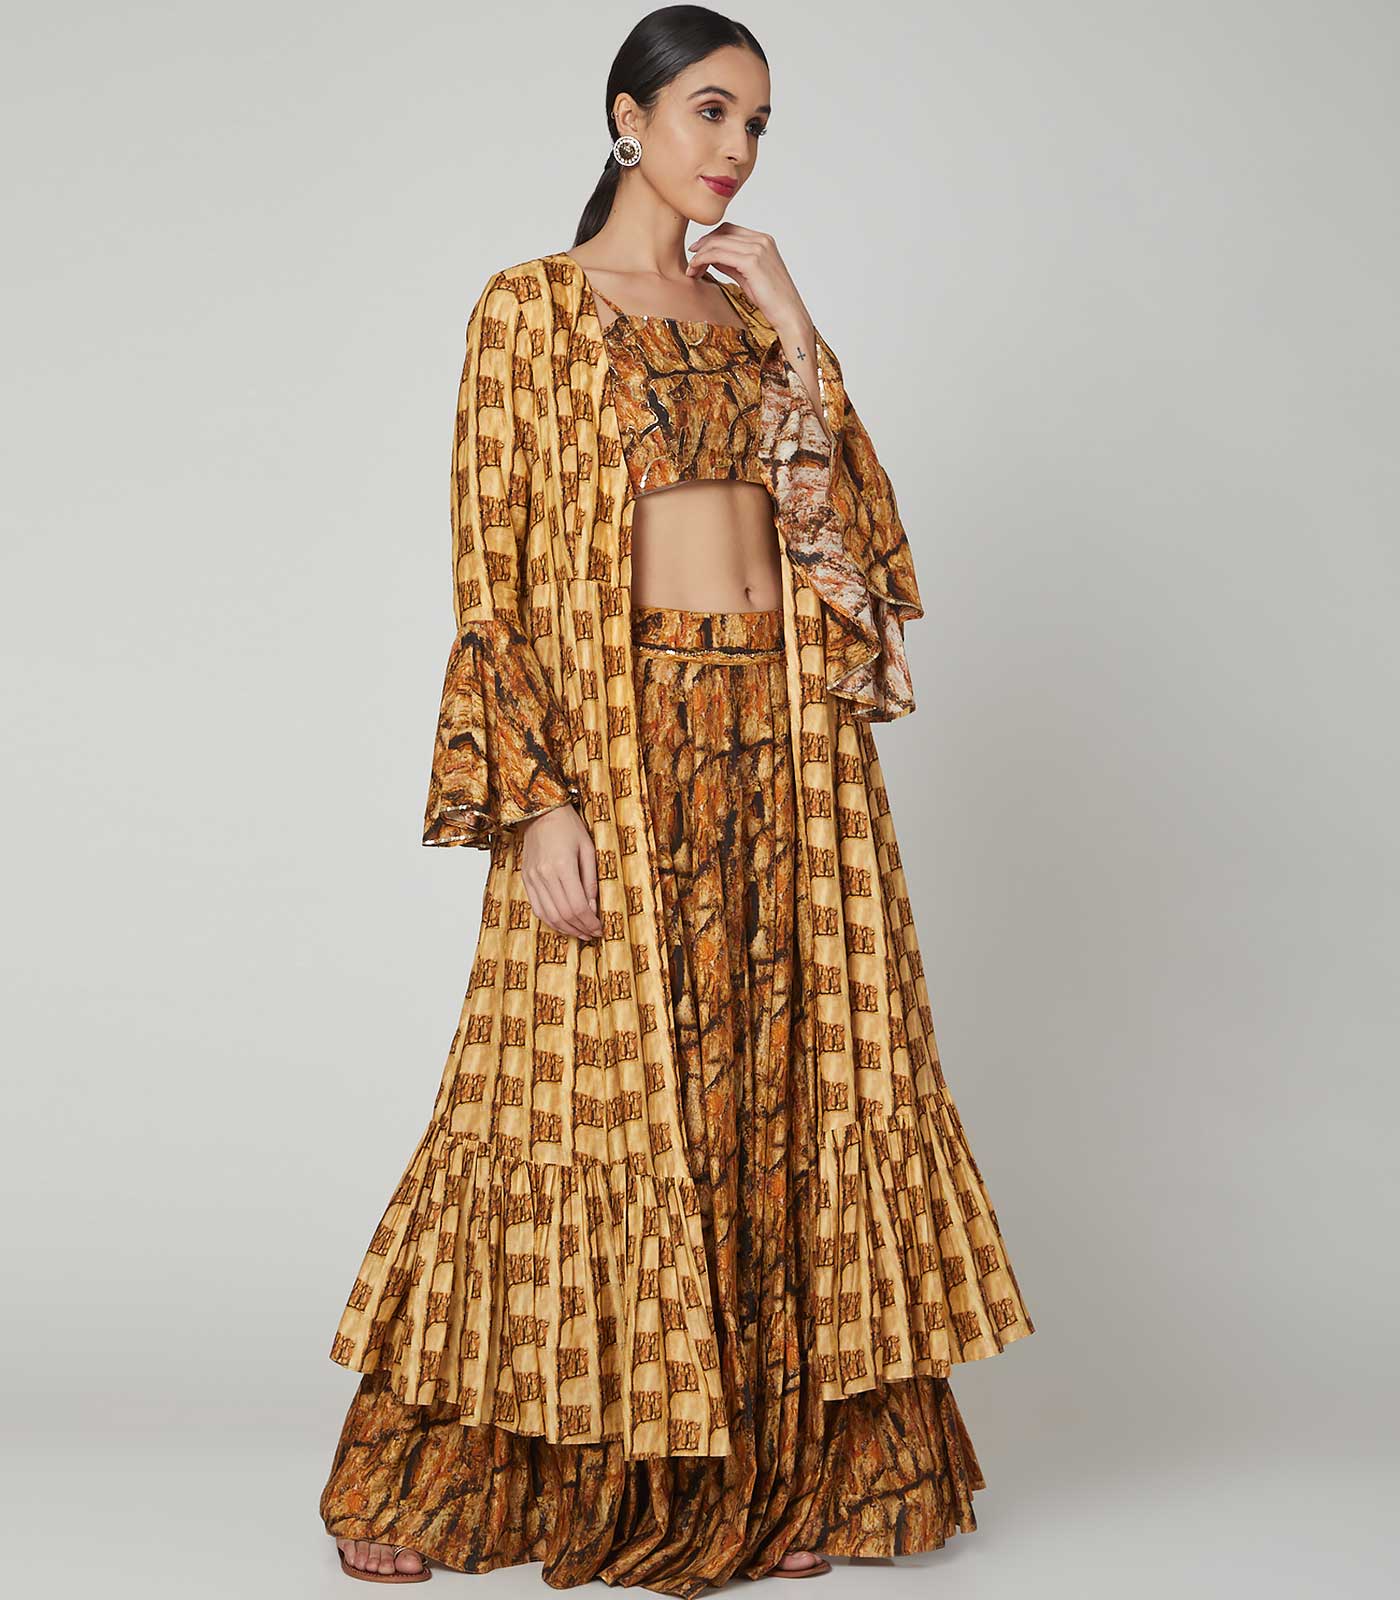 Gorgeous Heavy Designer Look Crop Top And Skirt With Jacket Embellished  With Emboidery And Hand Work On Crop Top L Size